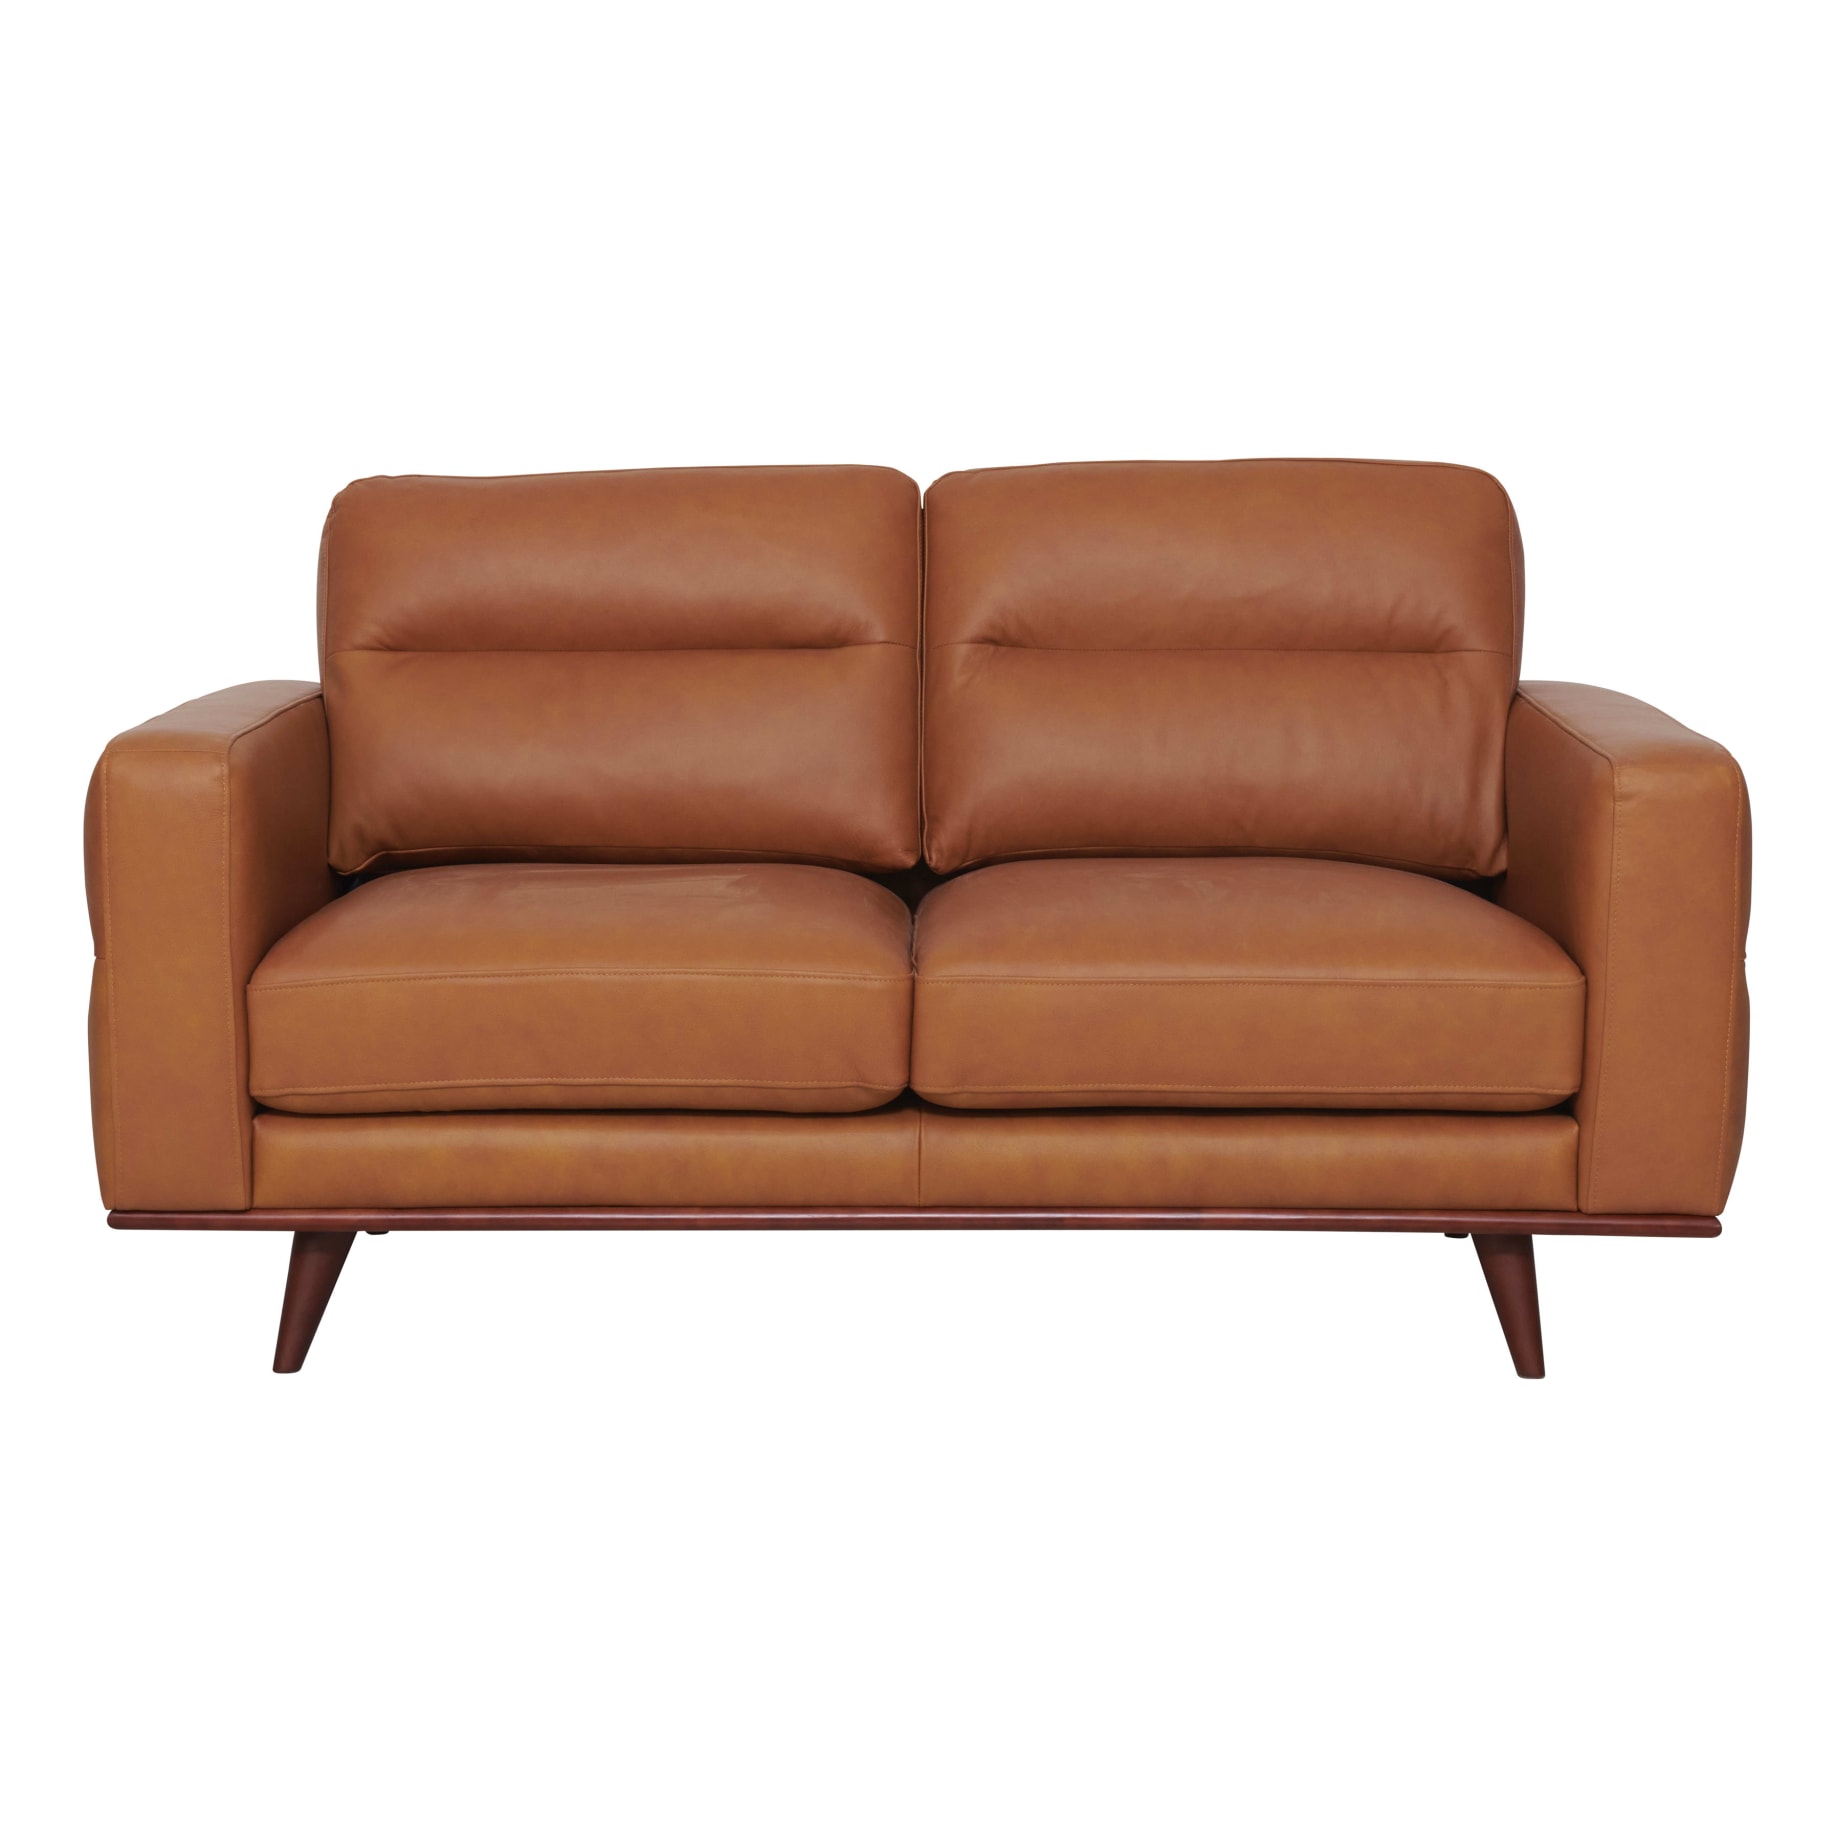 Astrid 2 Seater in Butler Leather Russet